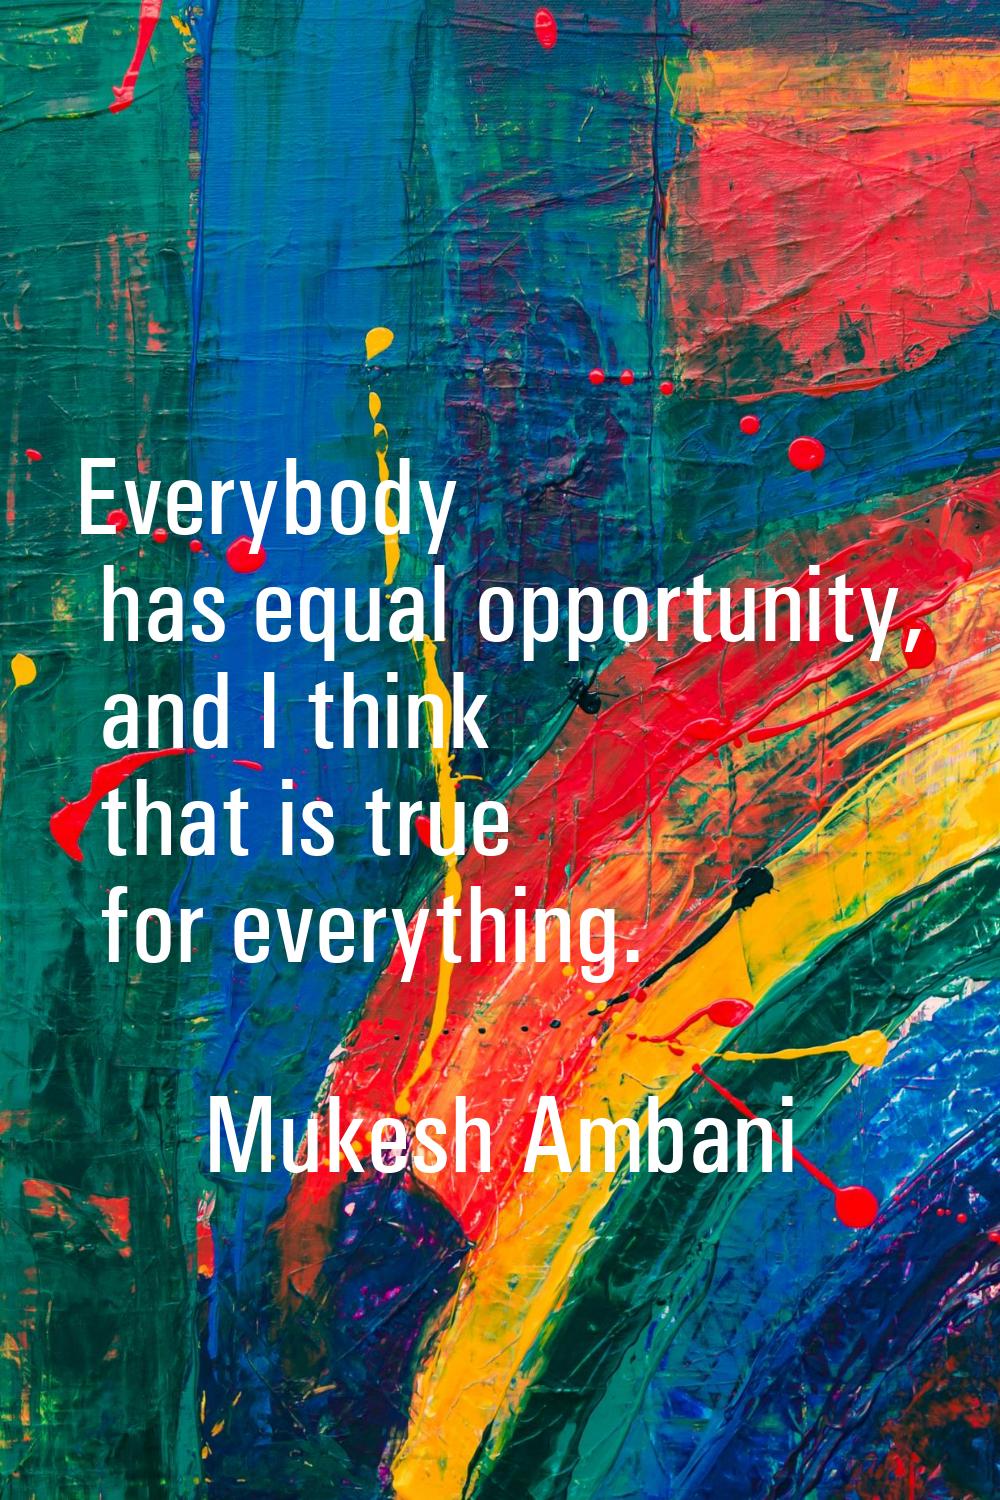 Everybody has equal opportunity, and I think that is true for everything.